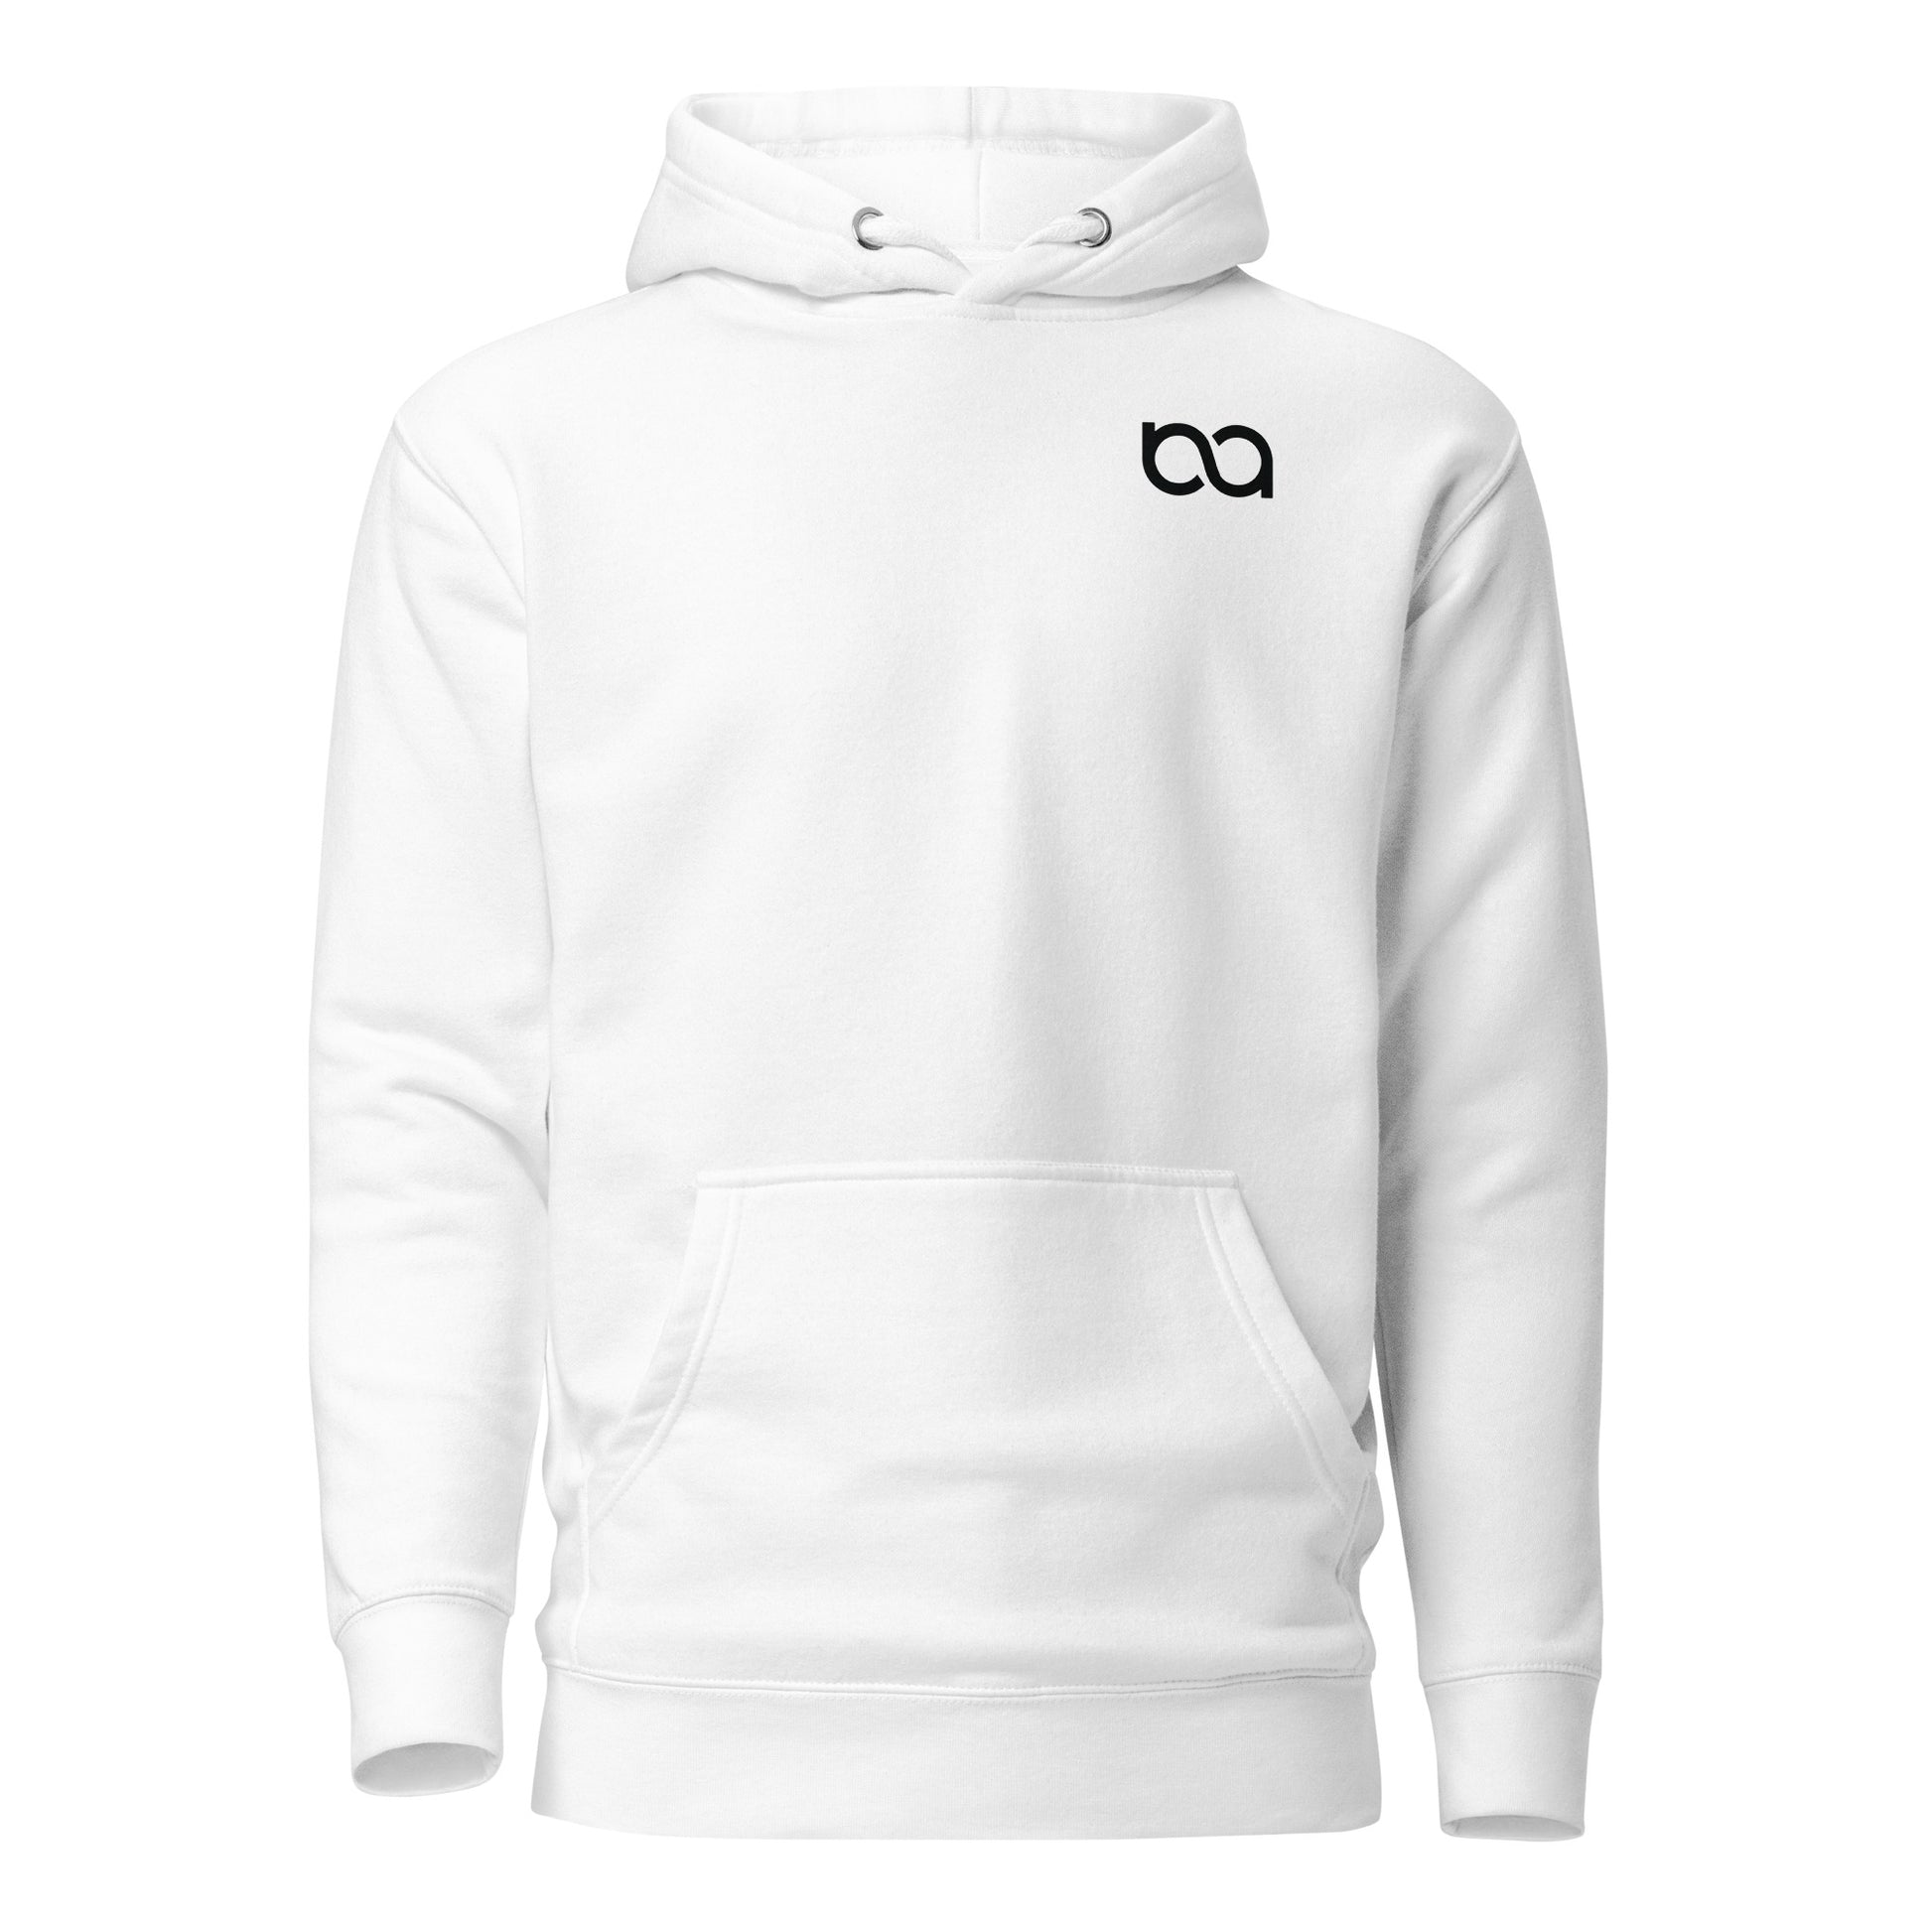 The Motivational Hoodie – Beyond Ambition